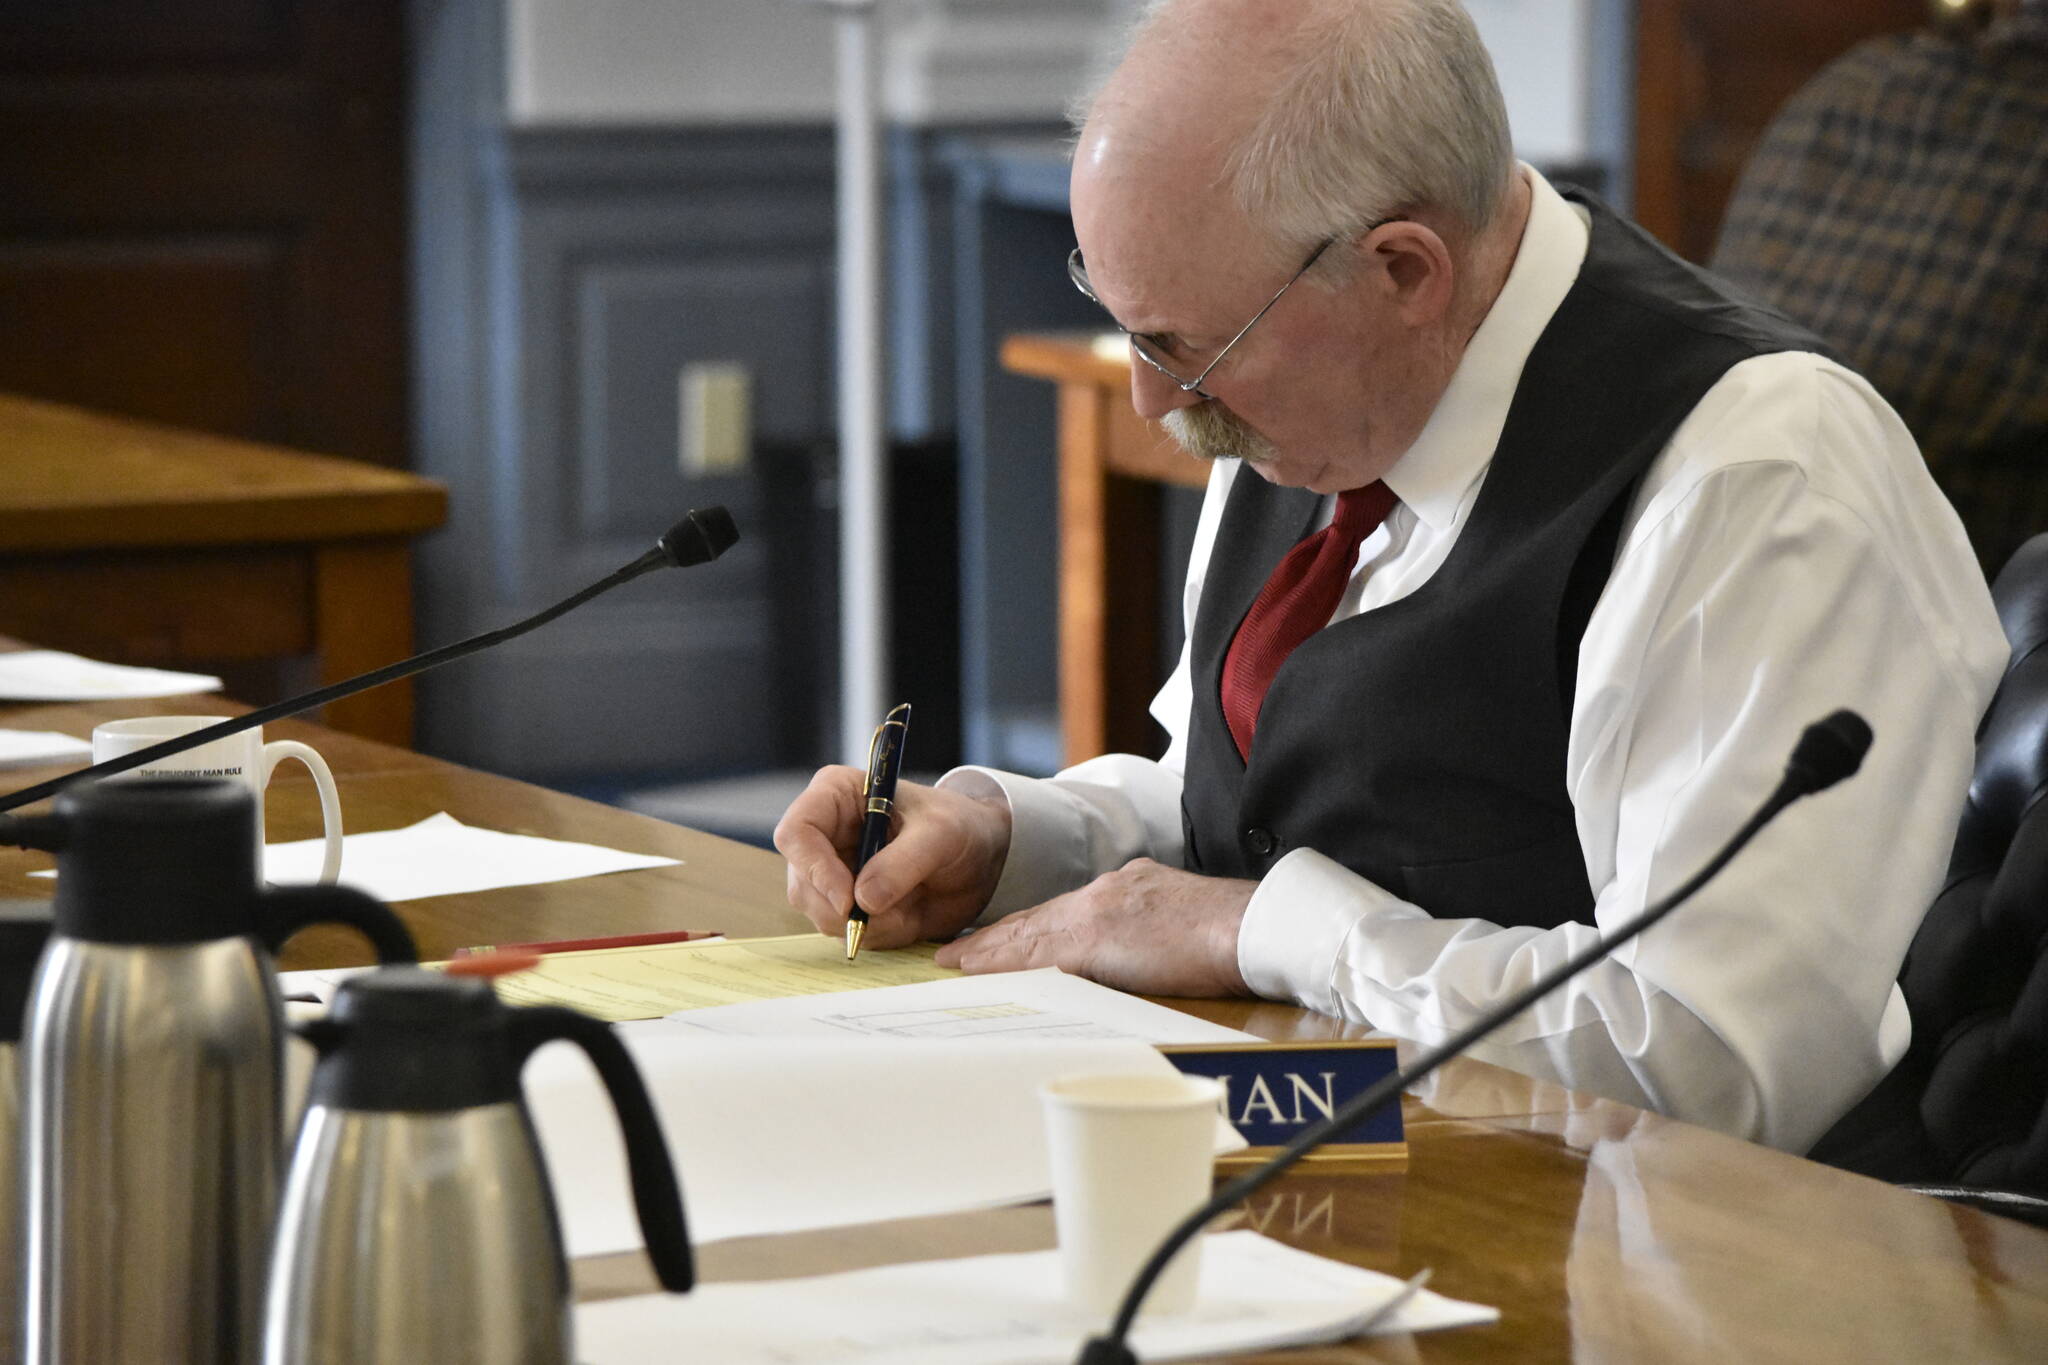 Sen. Bert Stedman, R-Sitka, chair of the bicameral conference committee tasked with hammering out differences in the state’s budget bill, signs the committee report as members finished their work on Tuesday, May 17, 2022. (Peter Segall / Juneau Empire